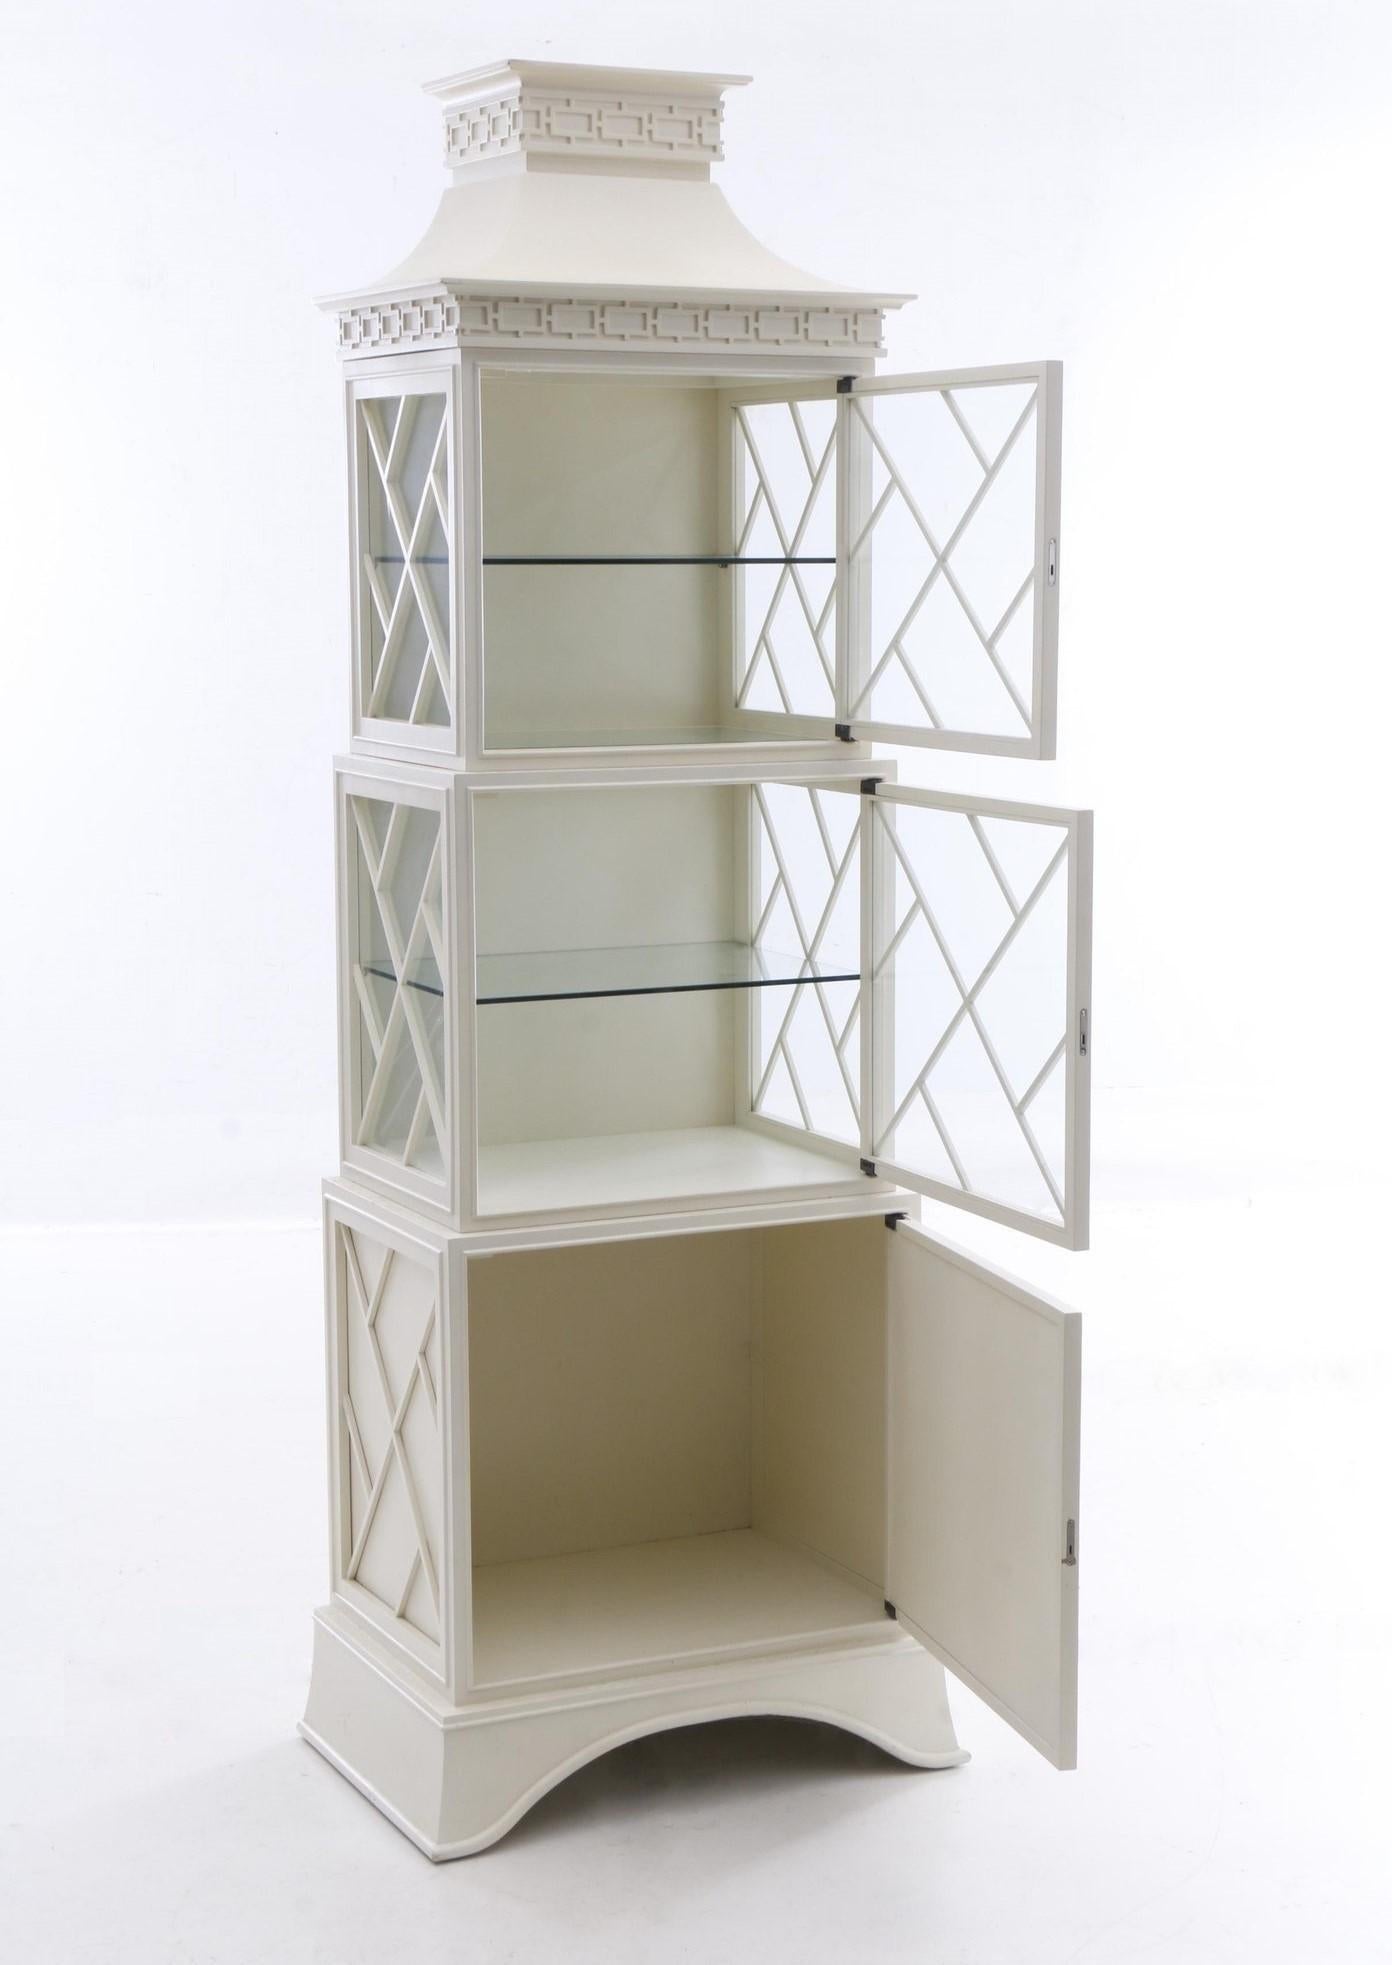 Timeless Chippendale's Chinese-style fretwork beautifully incorporated in this modern day lovely lighted display cabinet featuring wooden construction in a cream lacquer finish. This piece has a pagoda top over a graduated arrangement of three